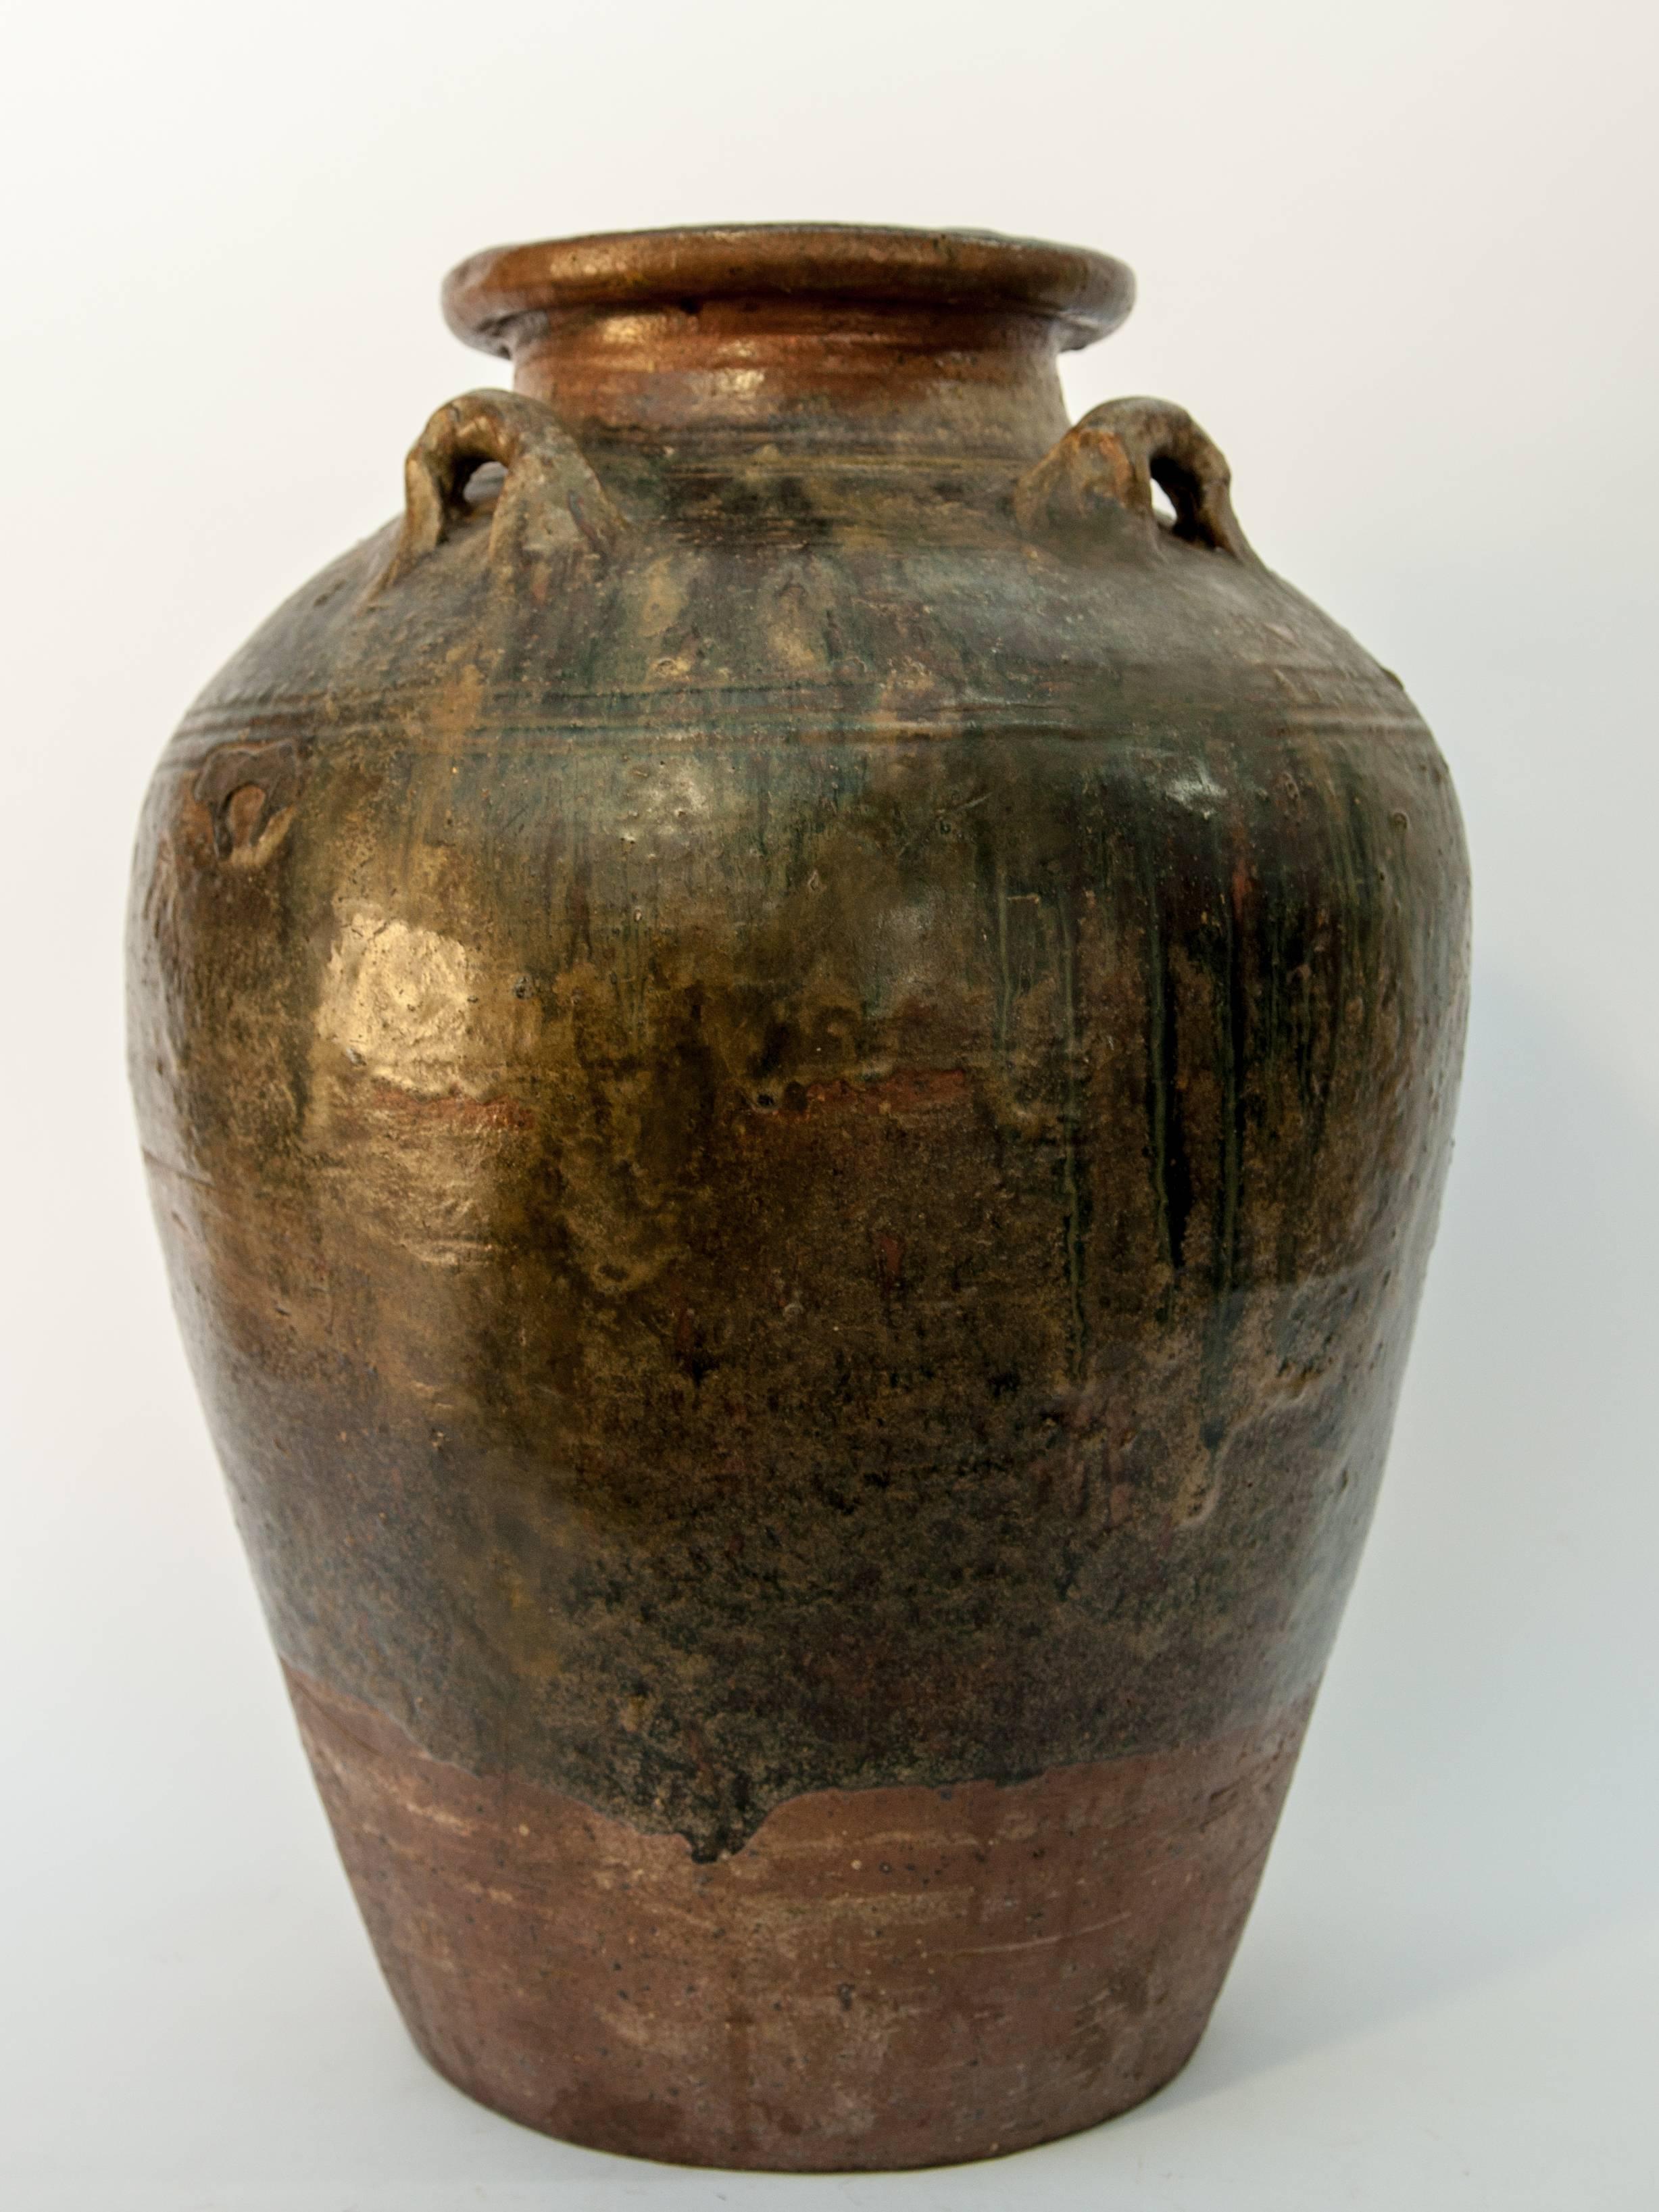 Martaban ware stoneware storage jar, running glaze, Ming dynasty, found in Laos.
This storage jar, brown with a multicolored running glaze, was recovered in Laos, but most likely manufactured elsewhere, in southern China during the Ming dynasty; or